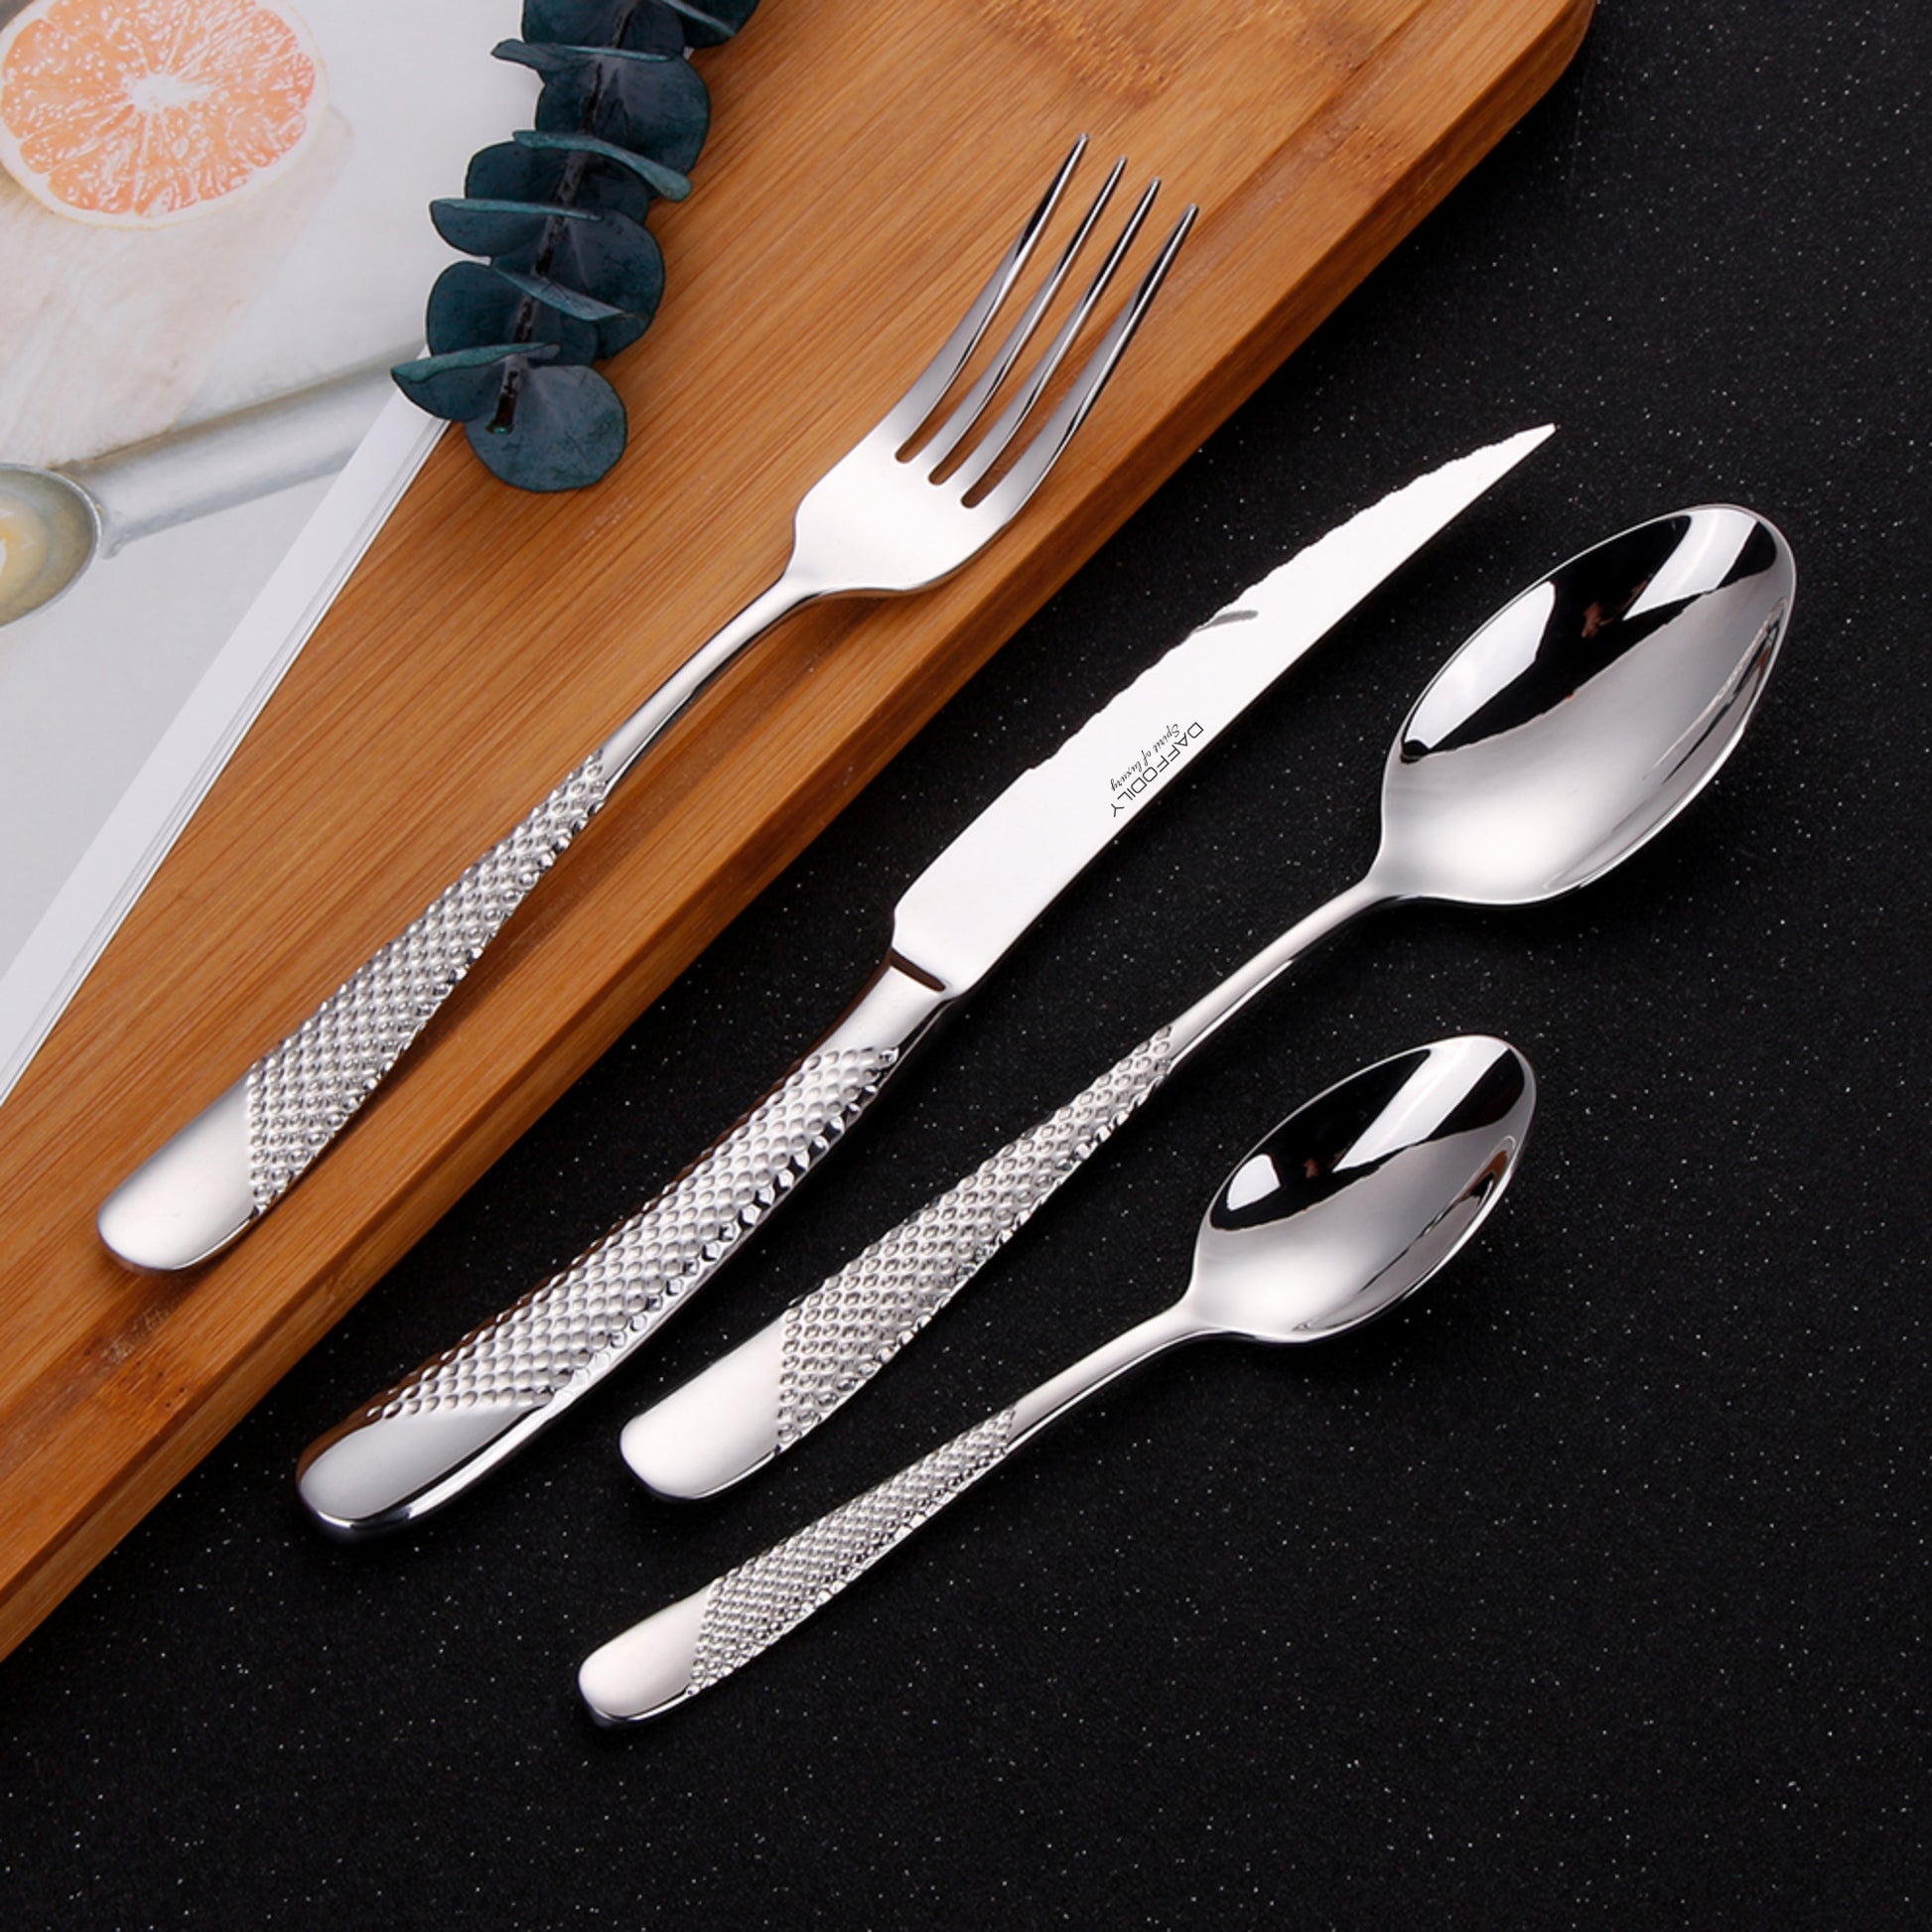 Sleek, minimalist cutlery set for a contemporary dining table